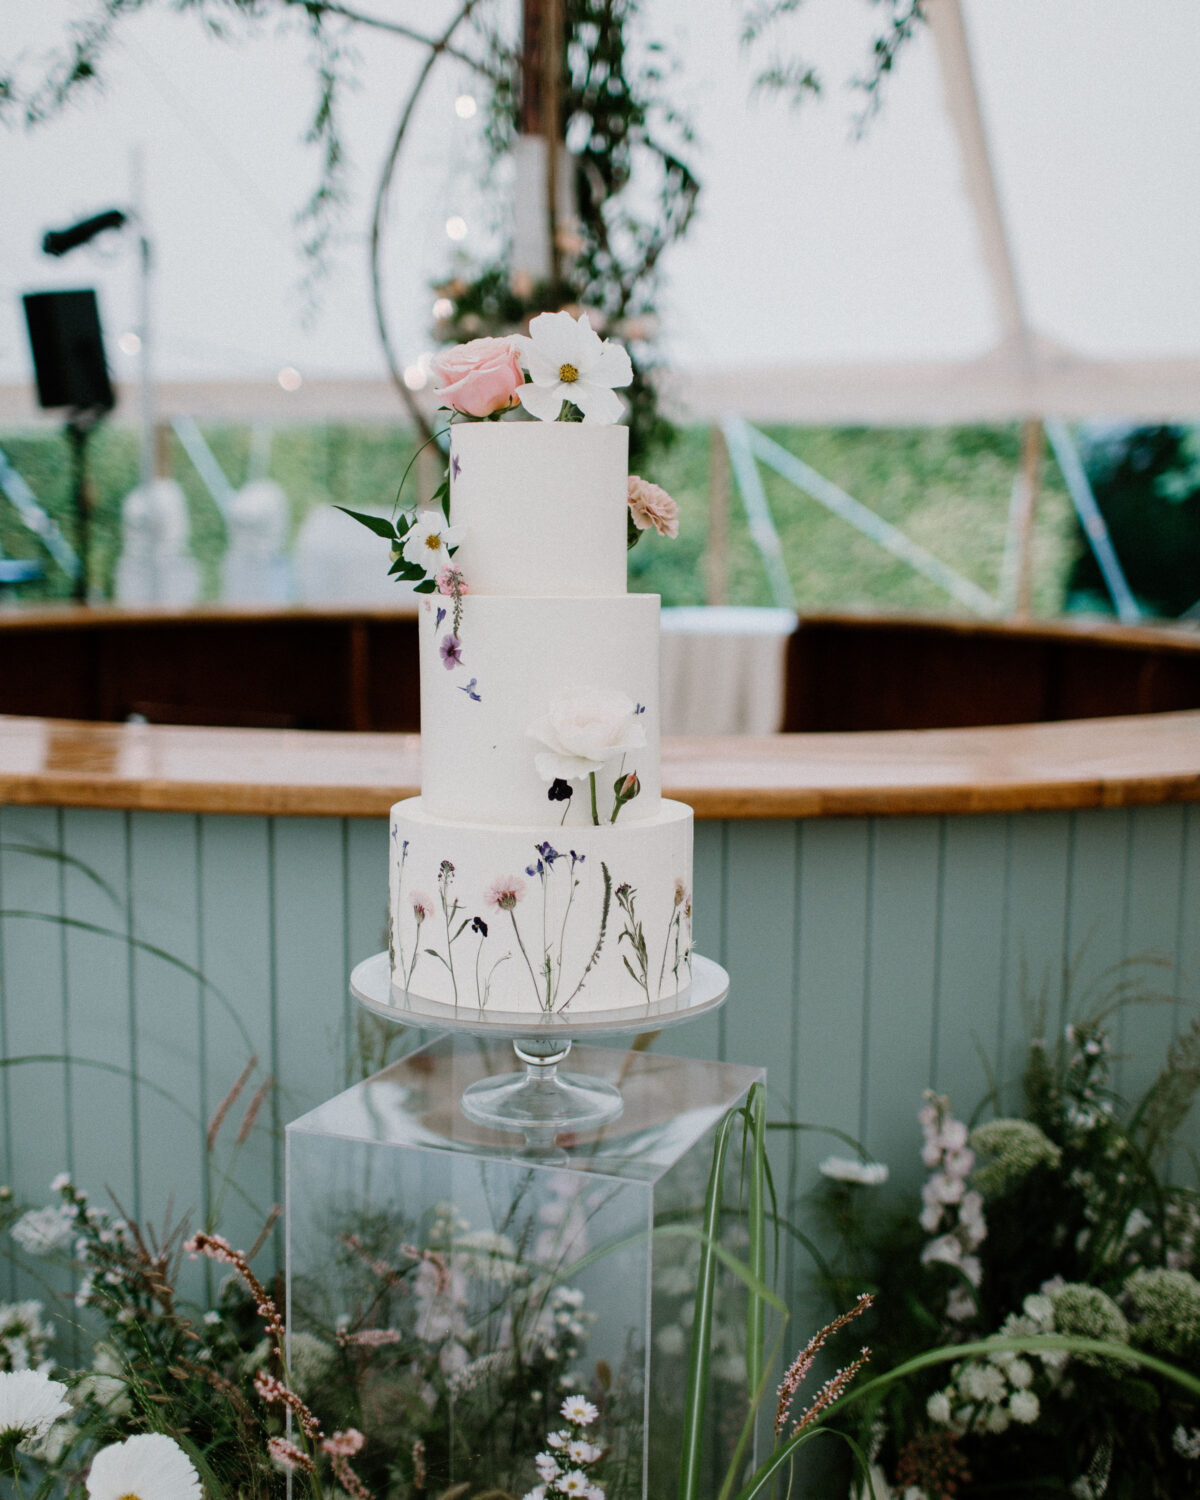 Pressed floral, secret garden feels for Emily and Hector. Photography by Nicola Dixon